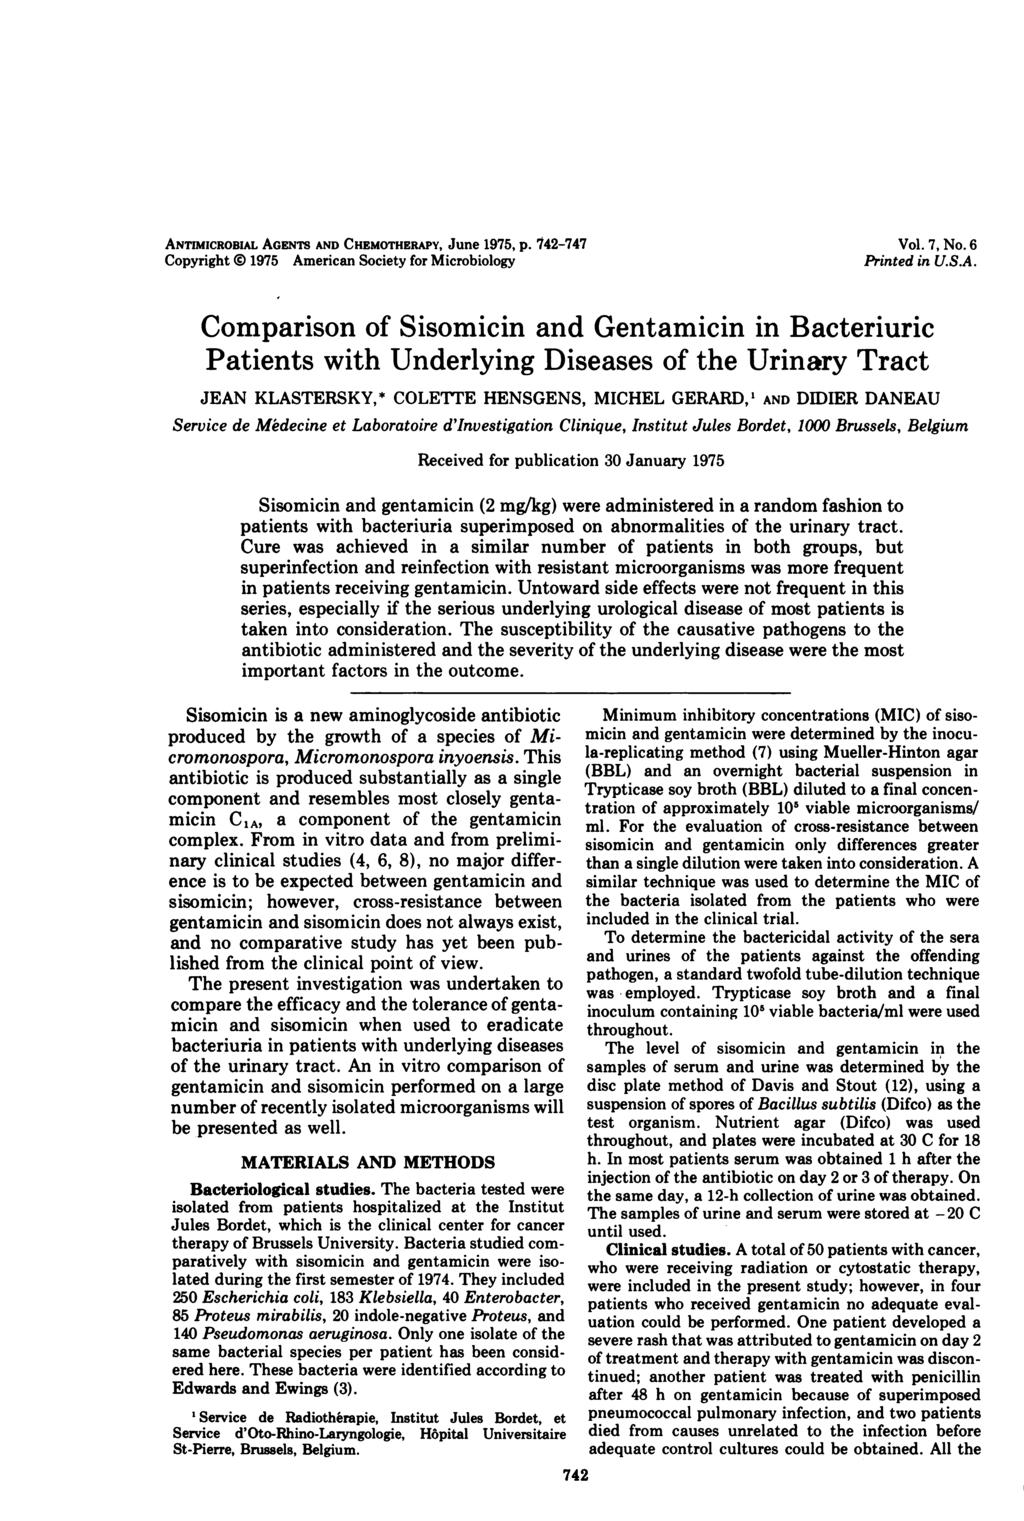 ANTIMICROBIAL AGENTS AND CHEMOTHERAPY, June 1975, p. 742-747 Copyright @ 1975 American Society for Microbiology Vol. 7, No. 6 Printed in U.S.A. Comparison of Sisomicin and Gentamicin in Bacteriuric